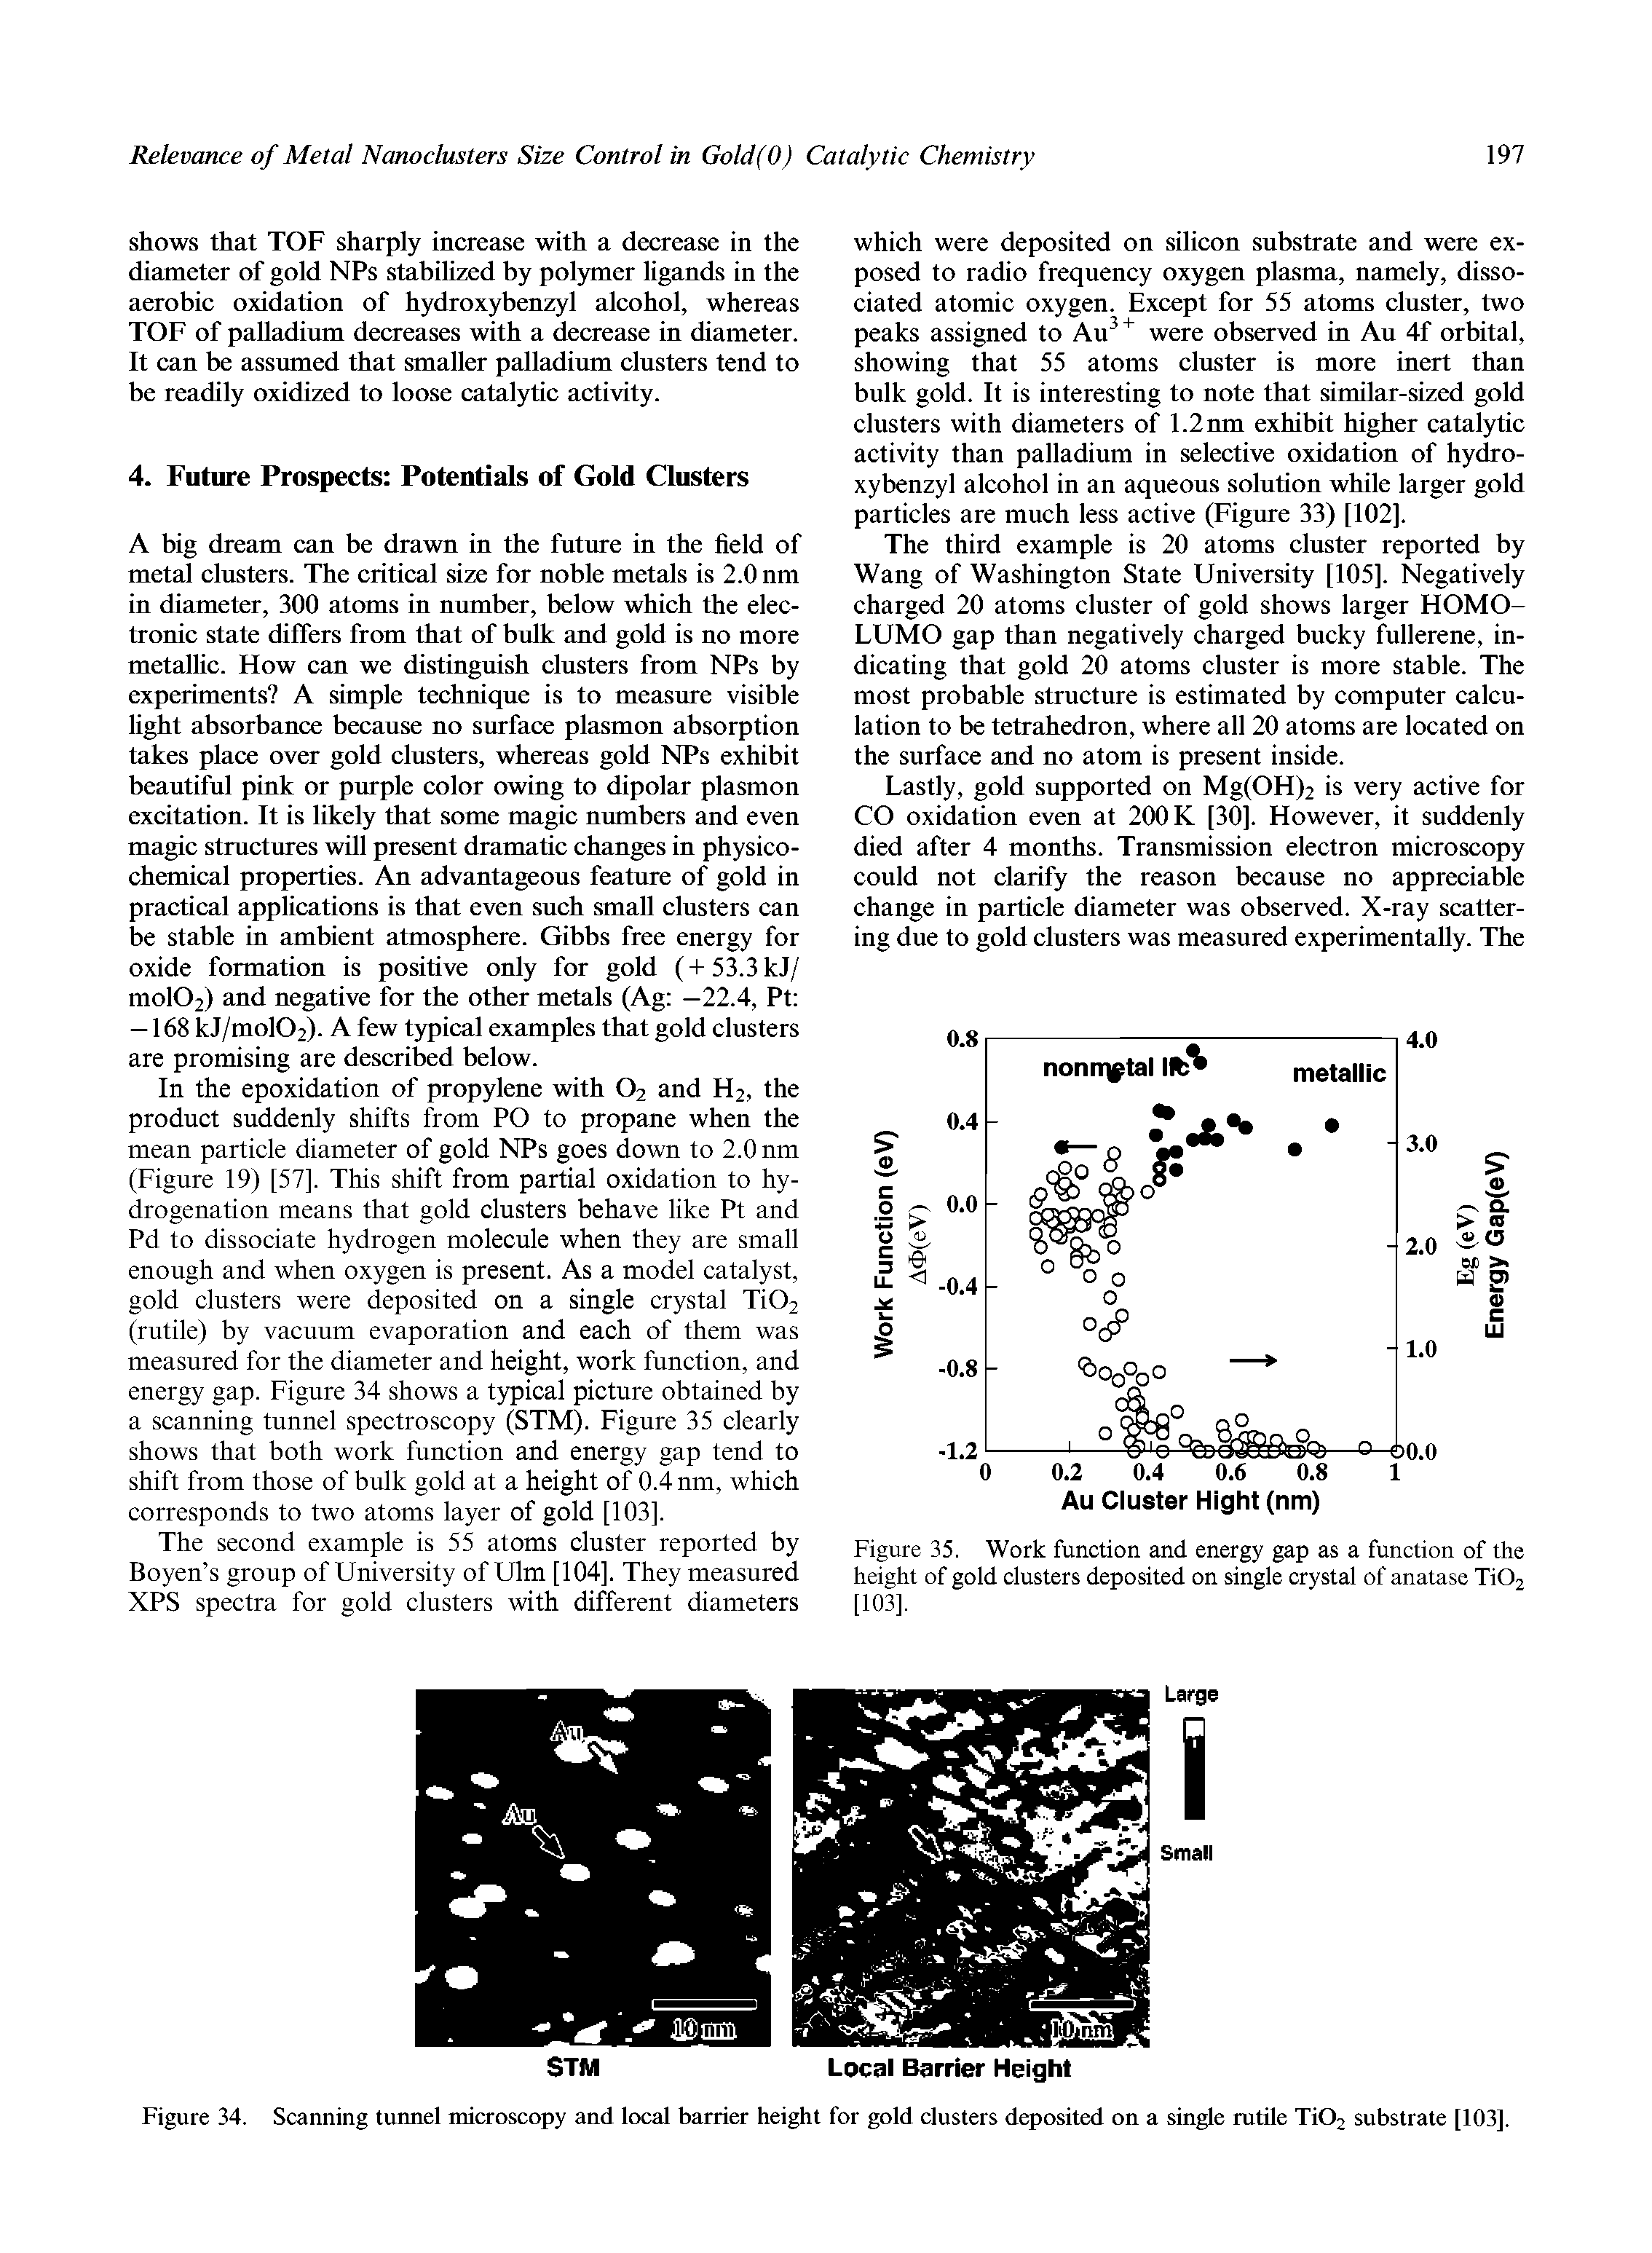 Figure 34. Scanning tunnel microscopy and local barrier height for gold clusters deposited on a single mtile Ti02 substrate [103].